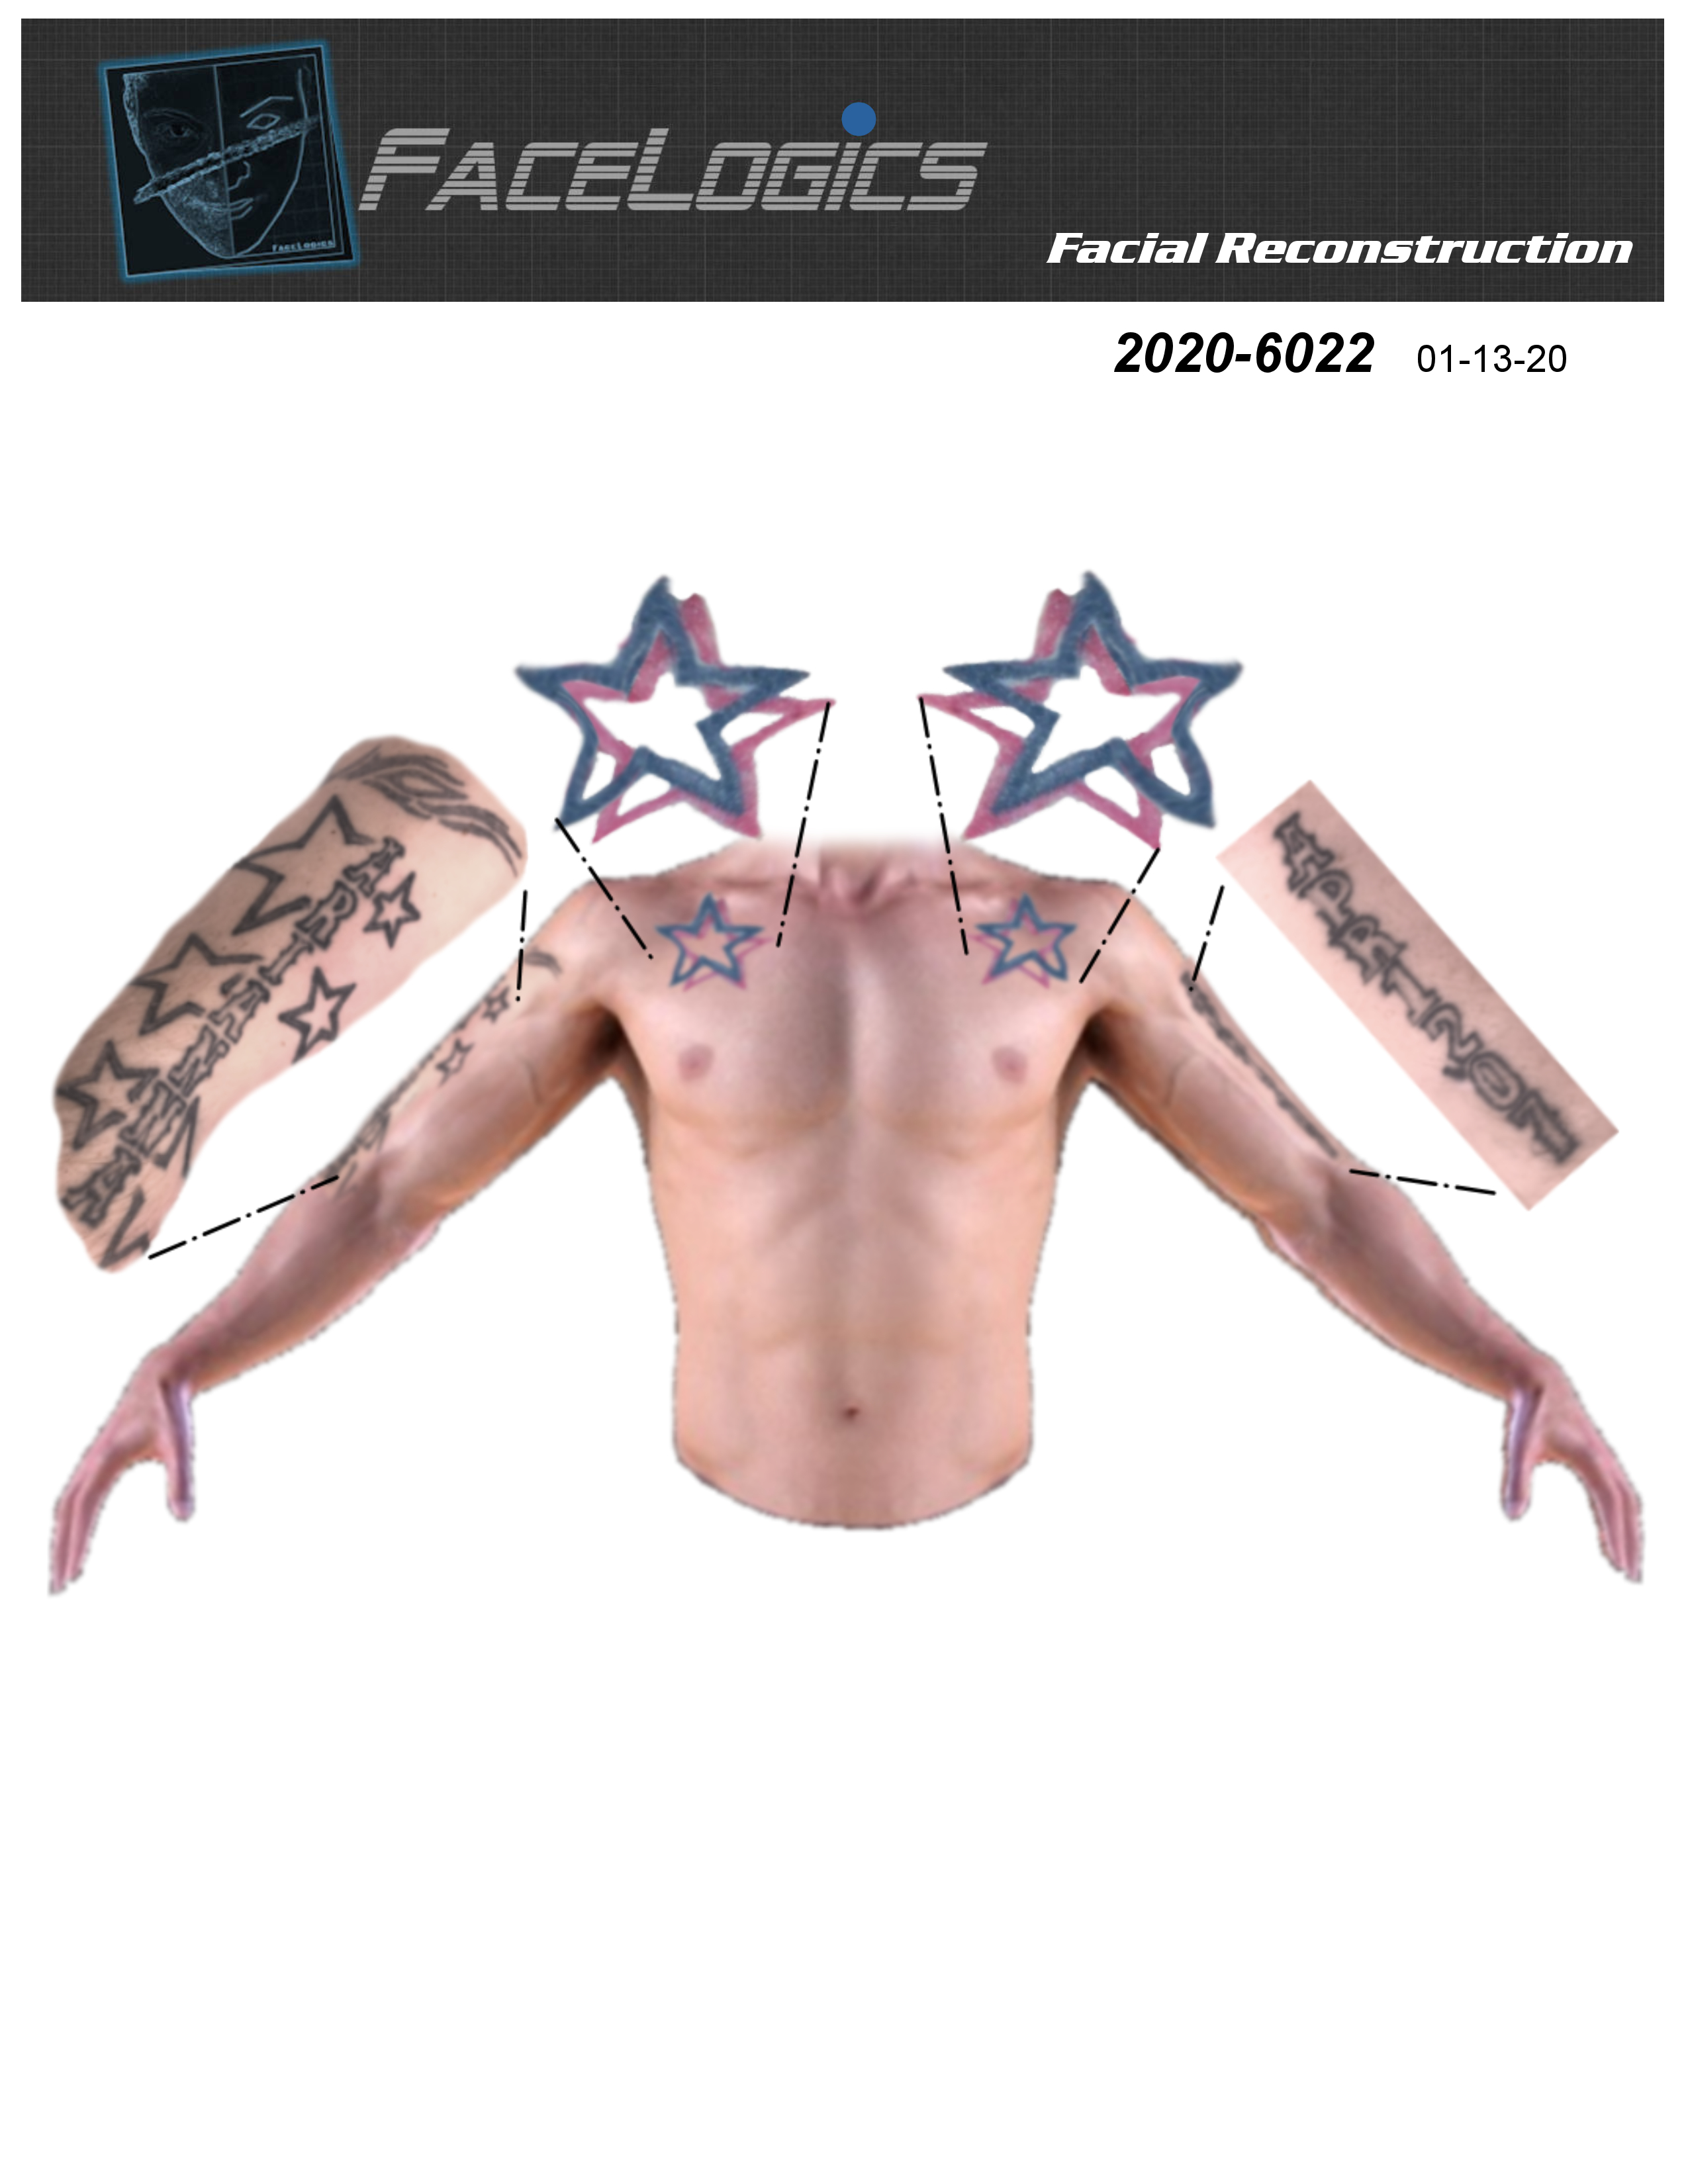 A reconstruction of the suspects tattoos.